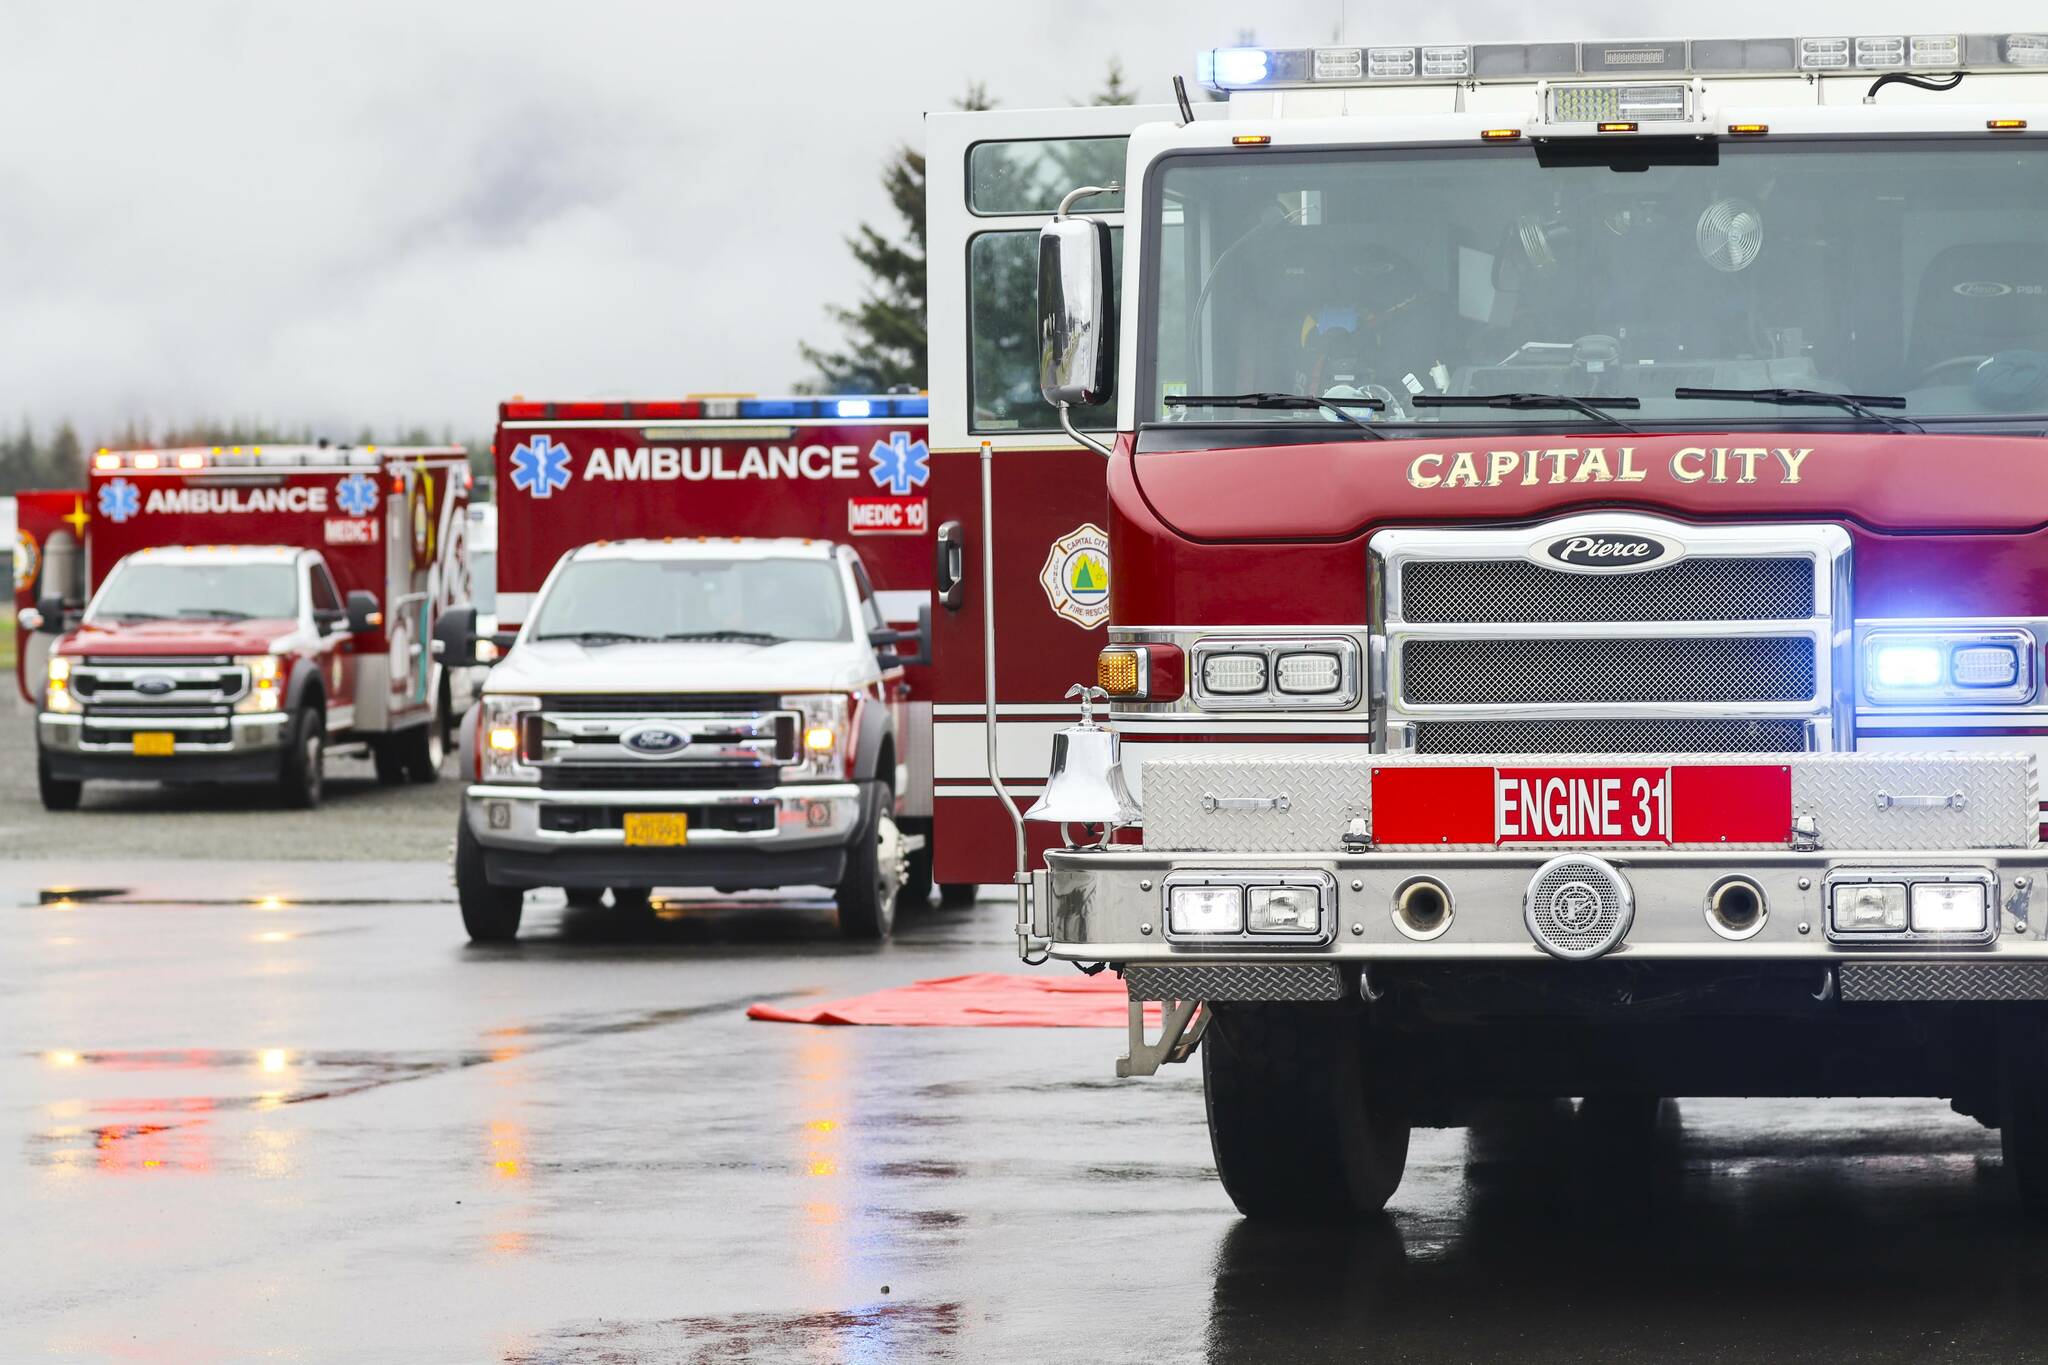 Capital City Fire/Rescue responded to a report Thursday evening of a fire at a residence in the Mendenhall Valley. (Michael S. Lockett / Juneau Empire)